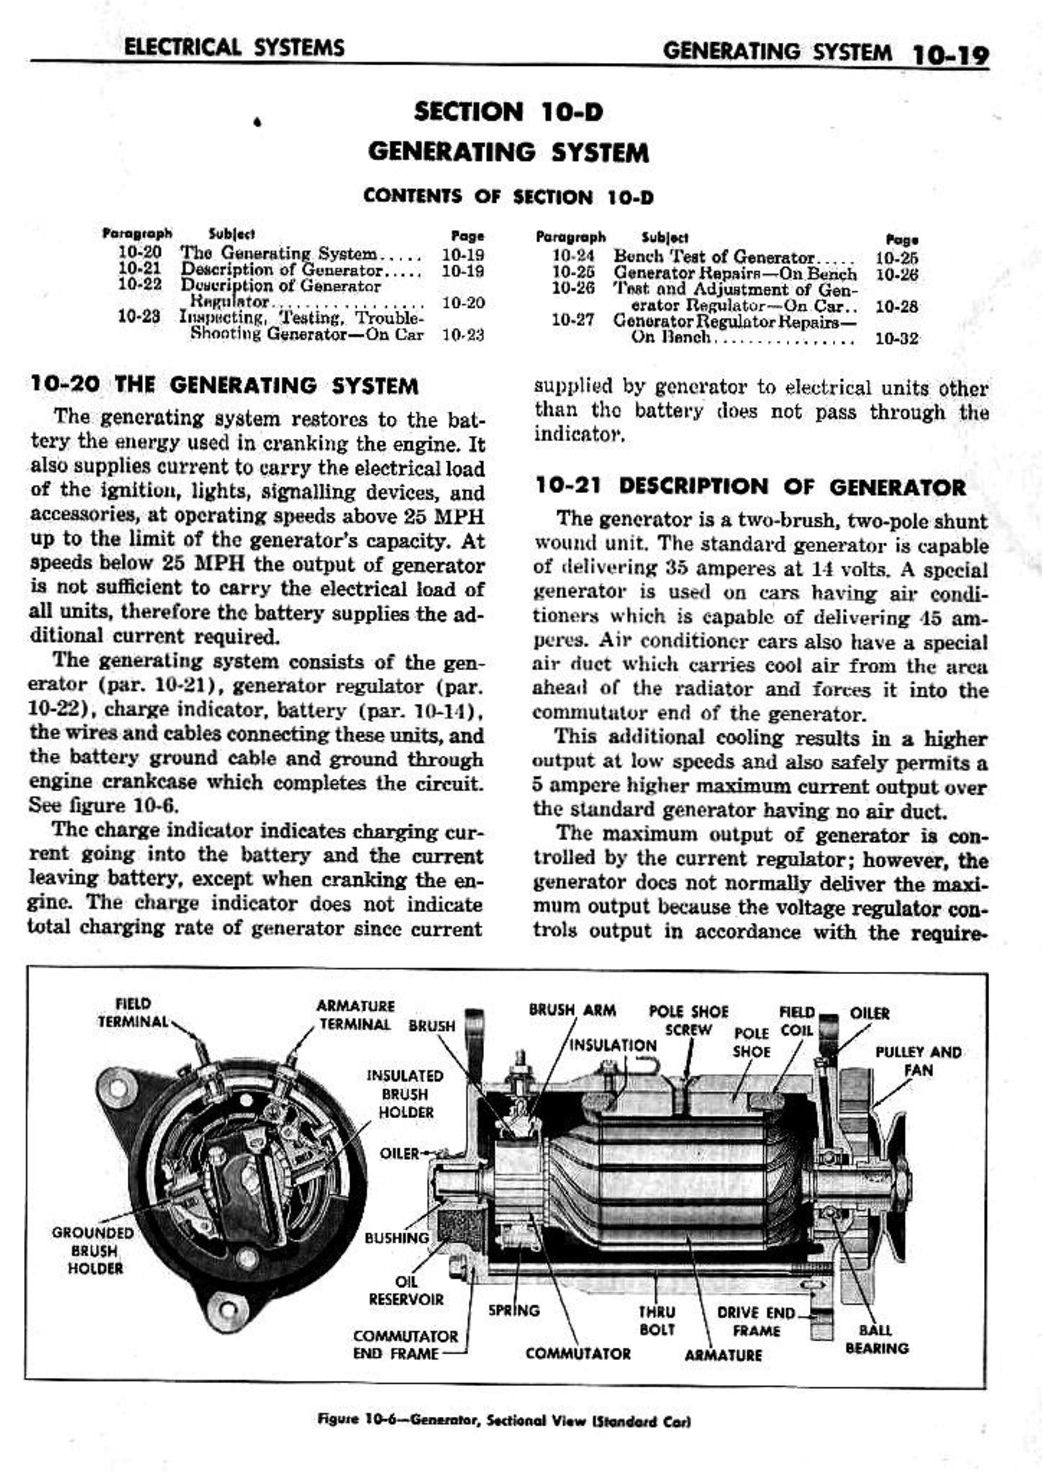 n_11 1959 Buick Shop Manual - Electrical Systems-019-019.jpg